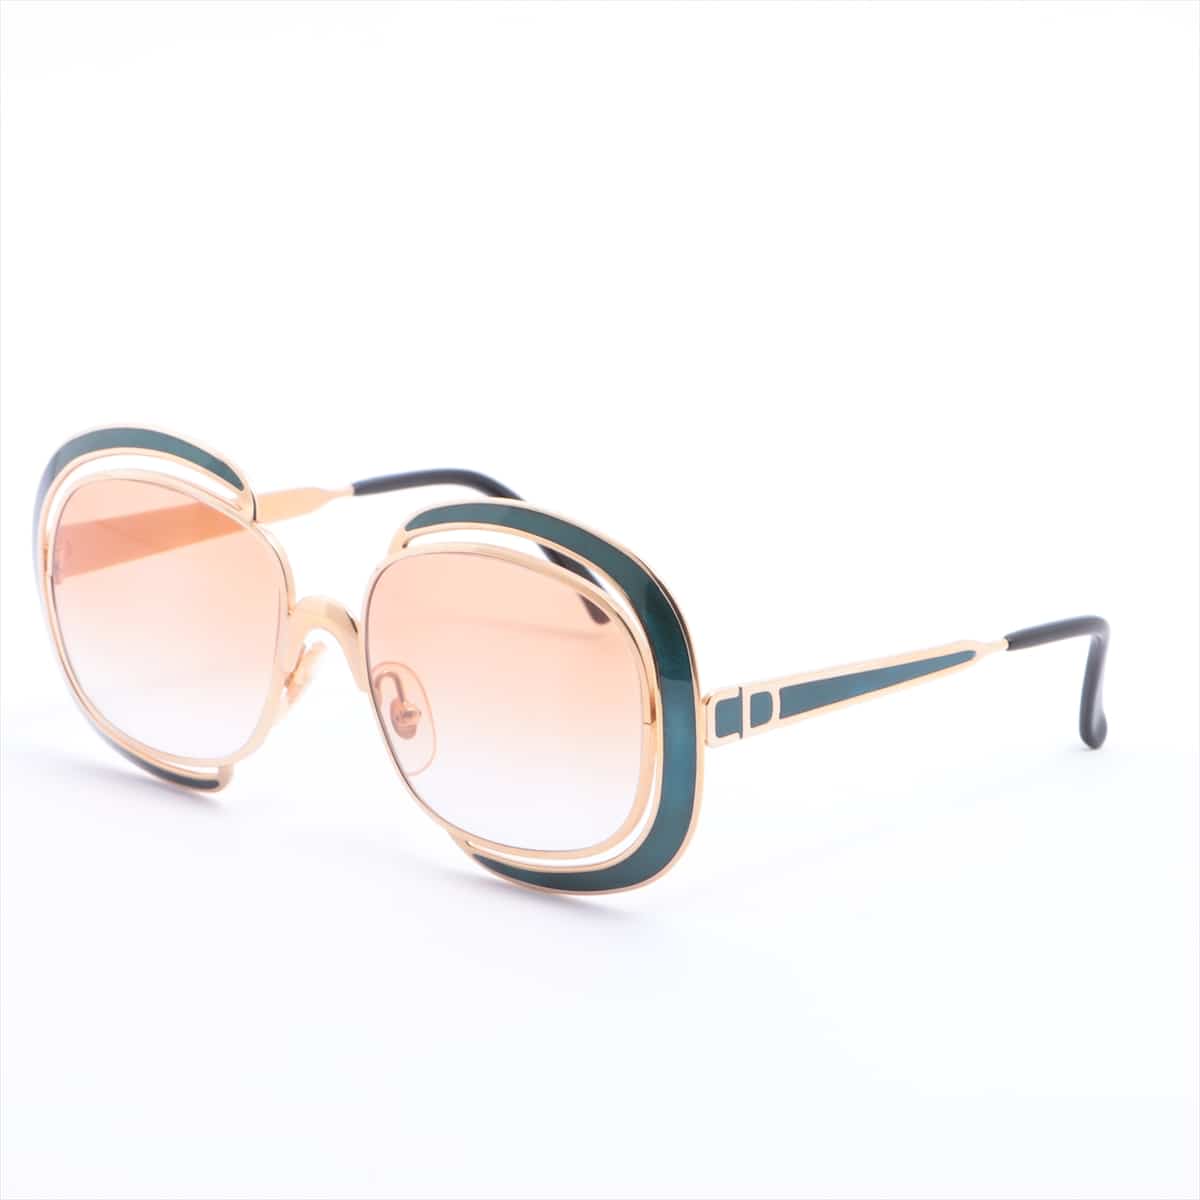 Christian Dior Sunglass GP One side of the temple is peeled off